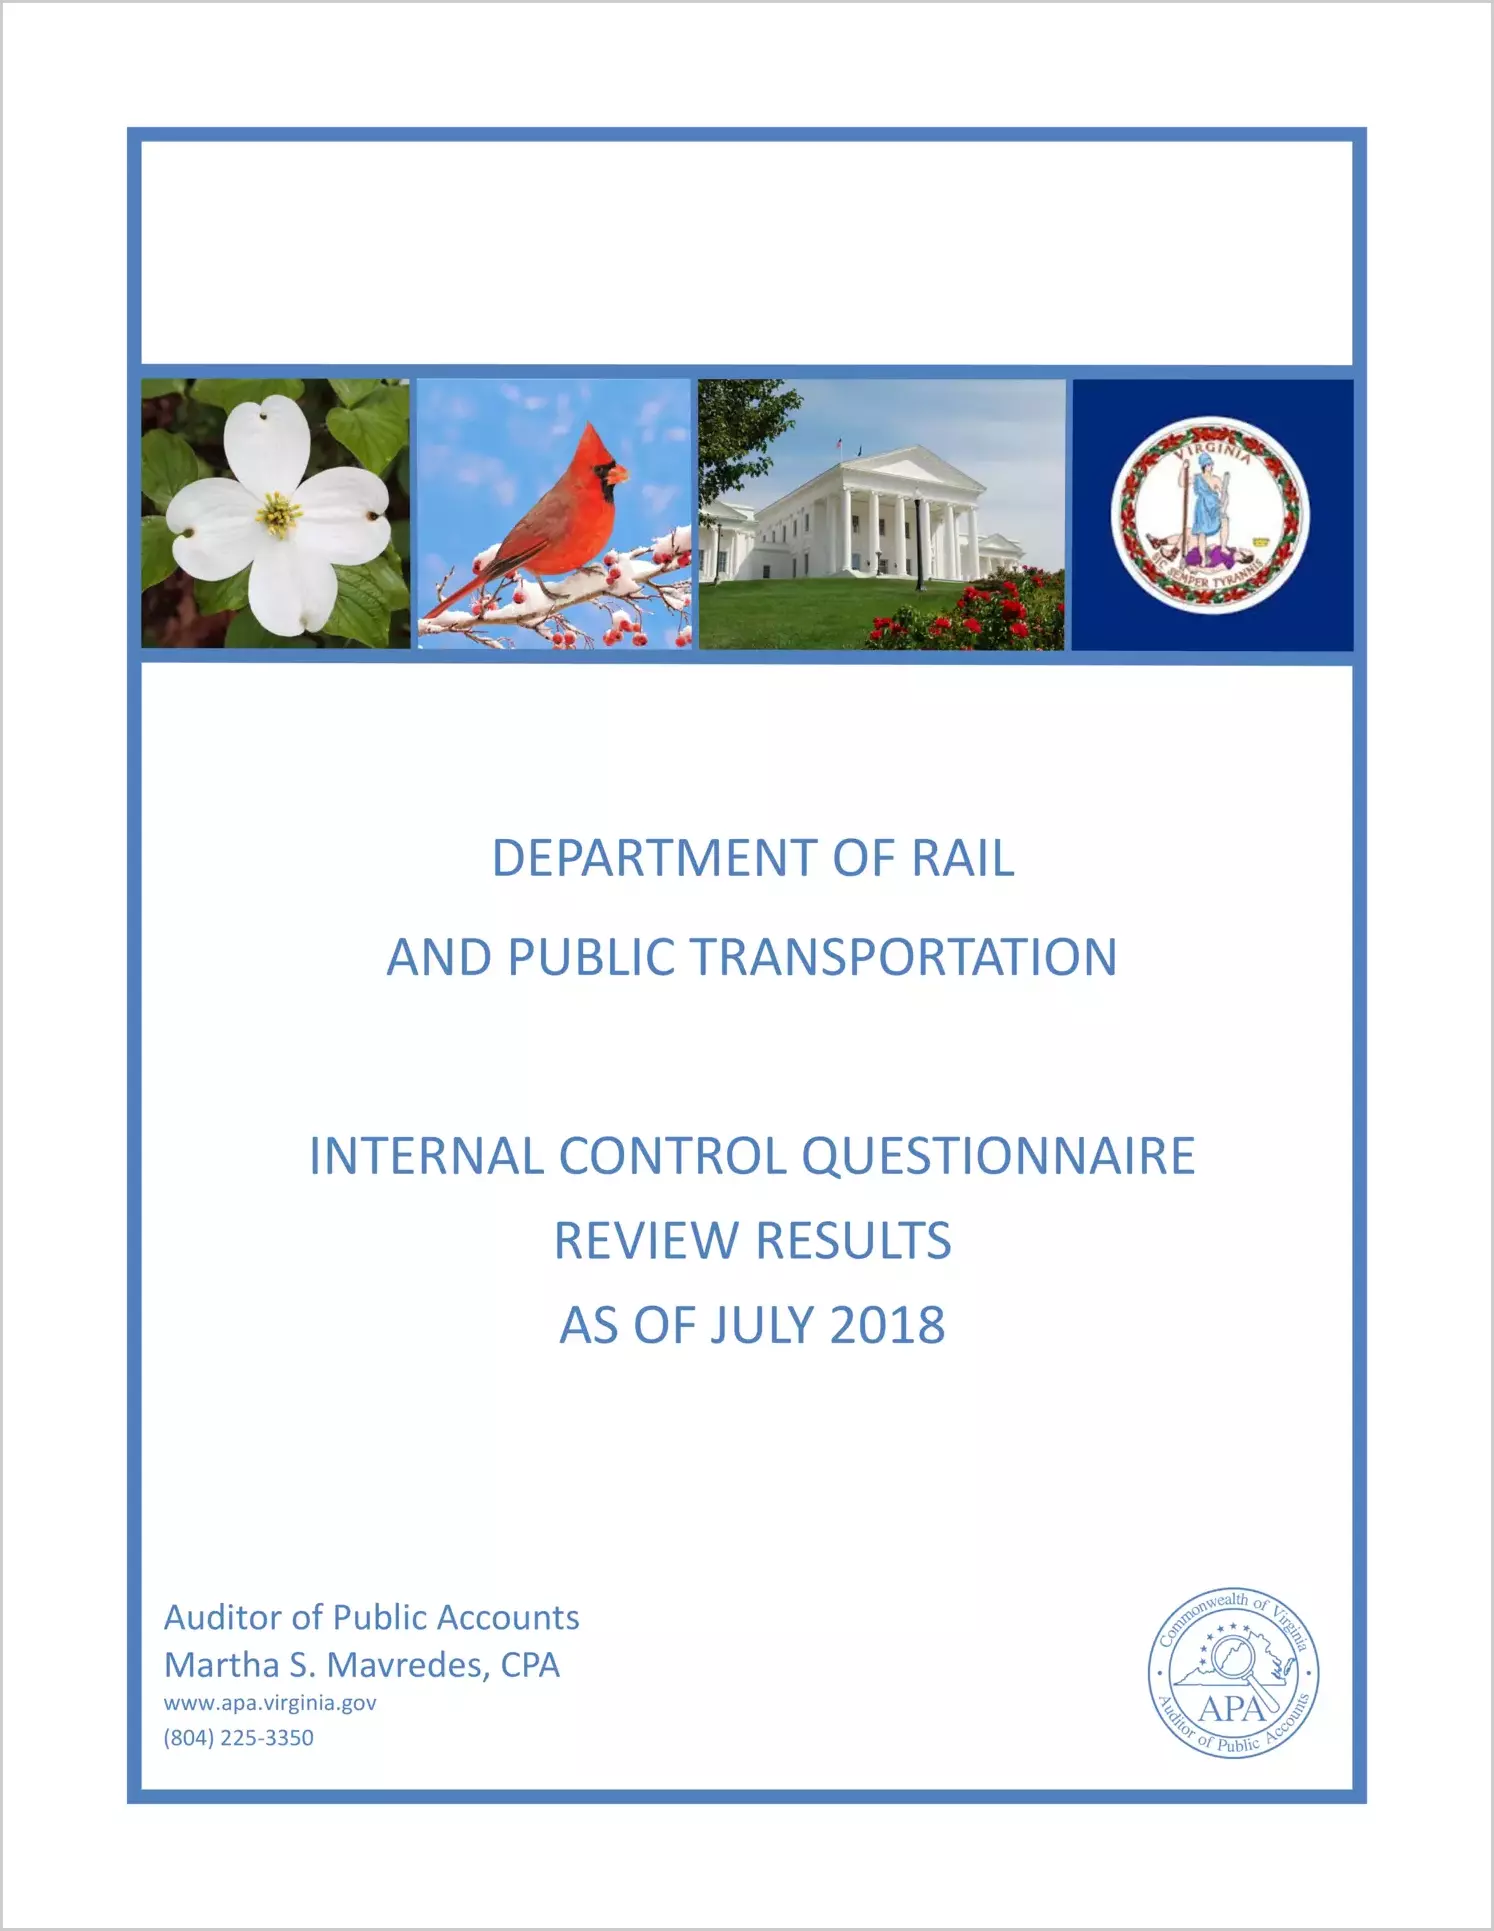 Department of Rail and Public Transportation Internal Contol Questionnaire Review Results as of July 2018